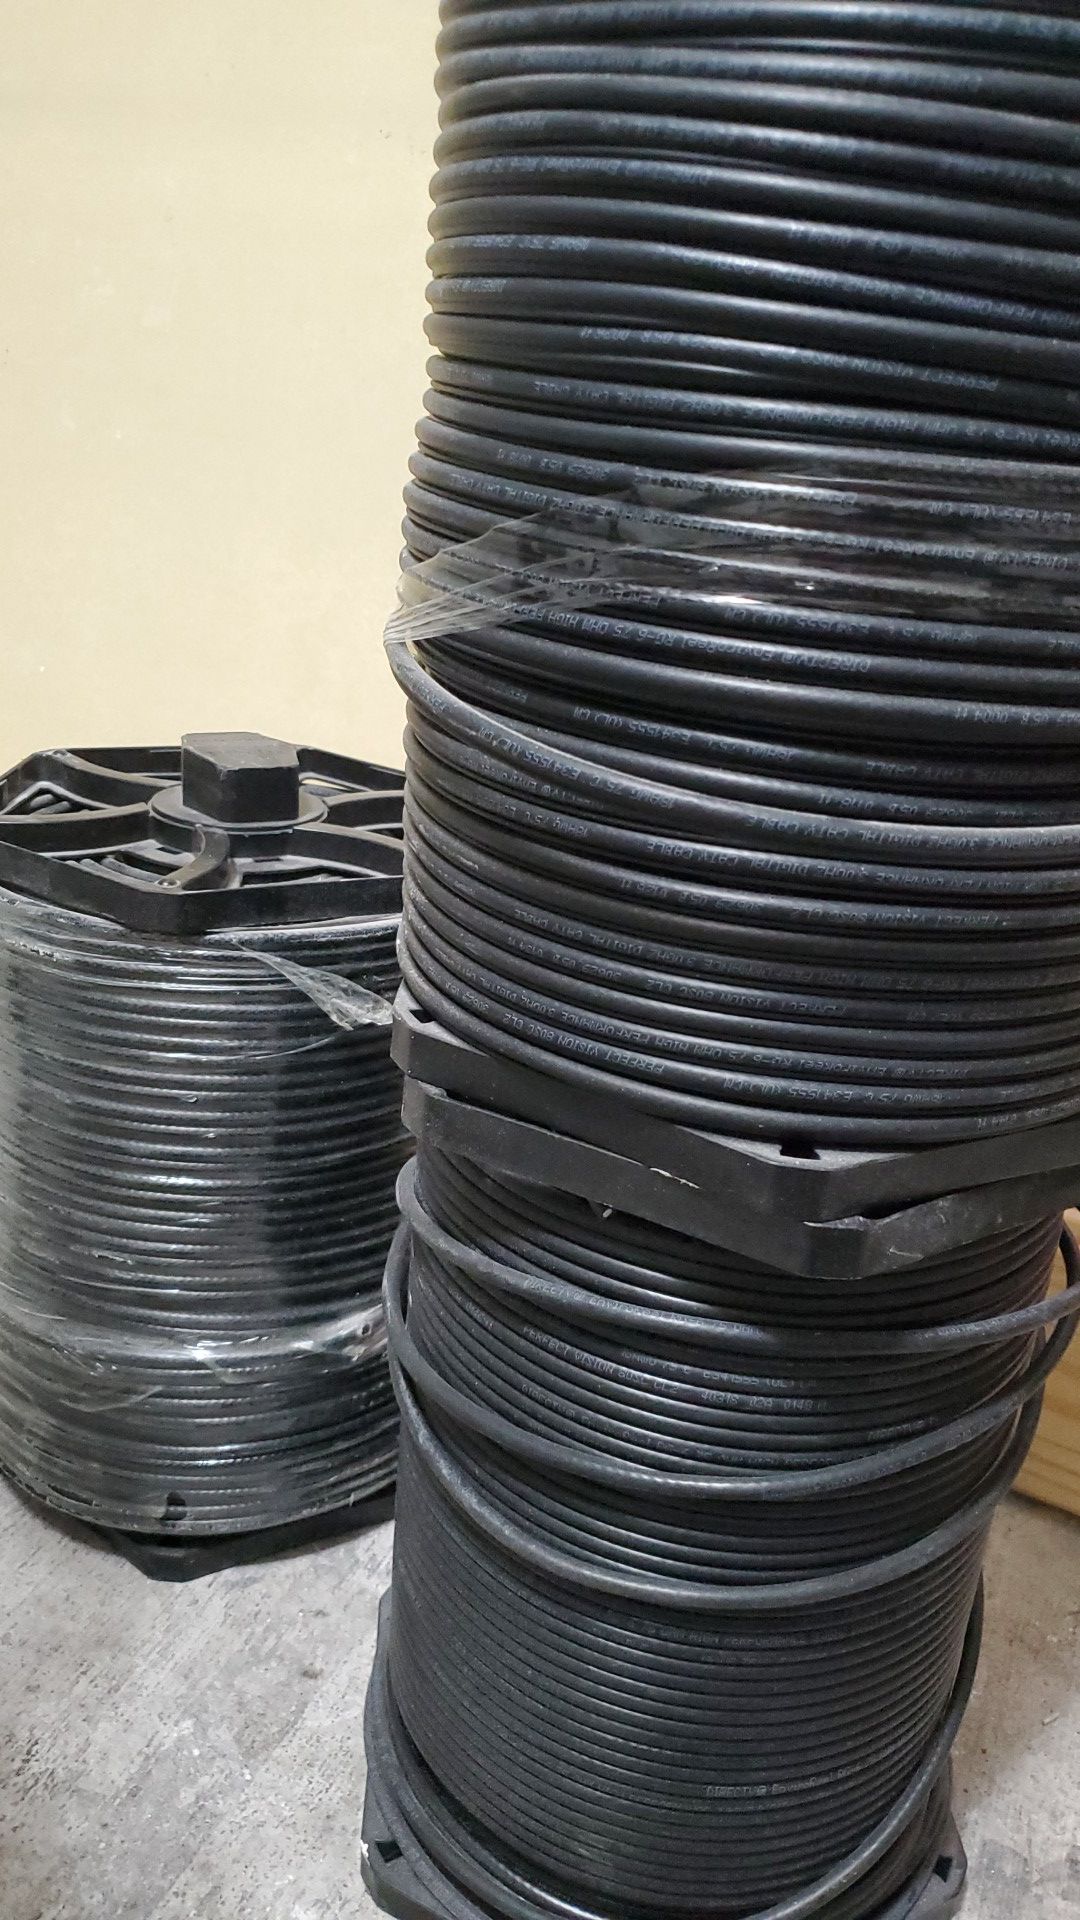 Cable coaxial, coaxial cable